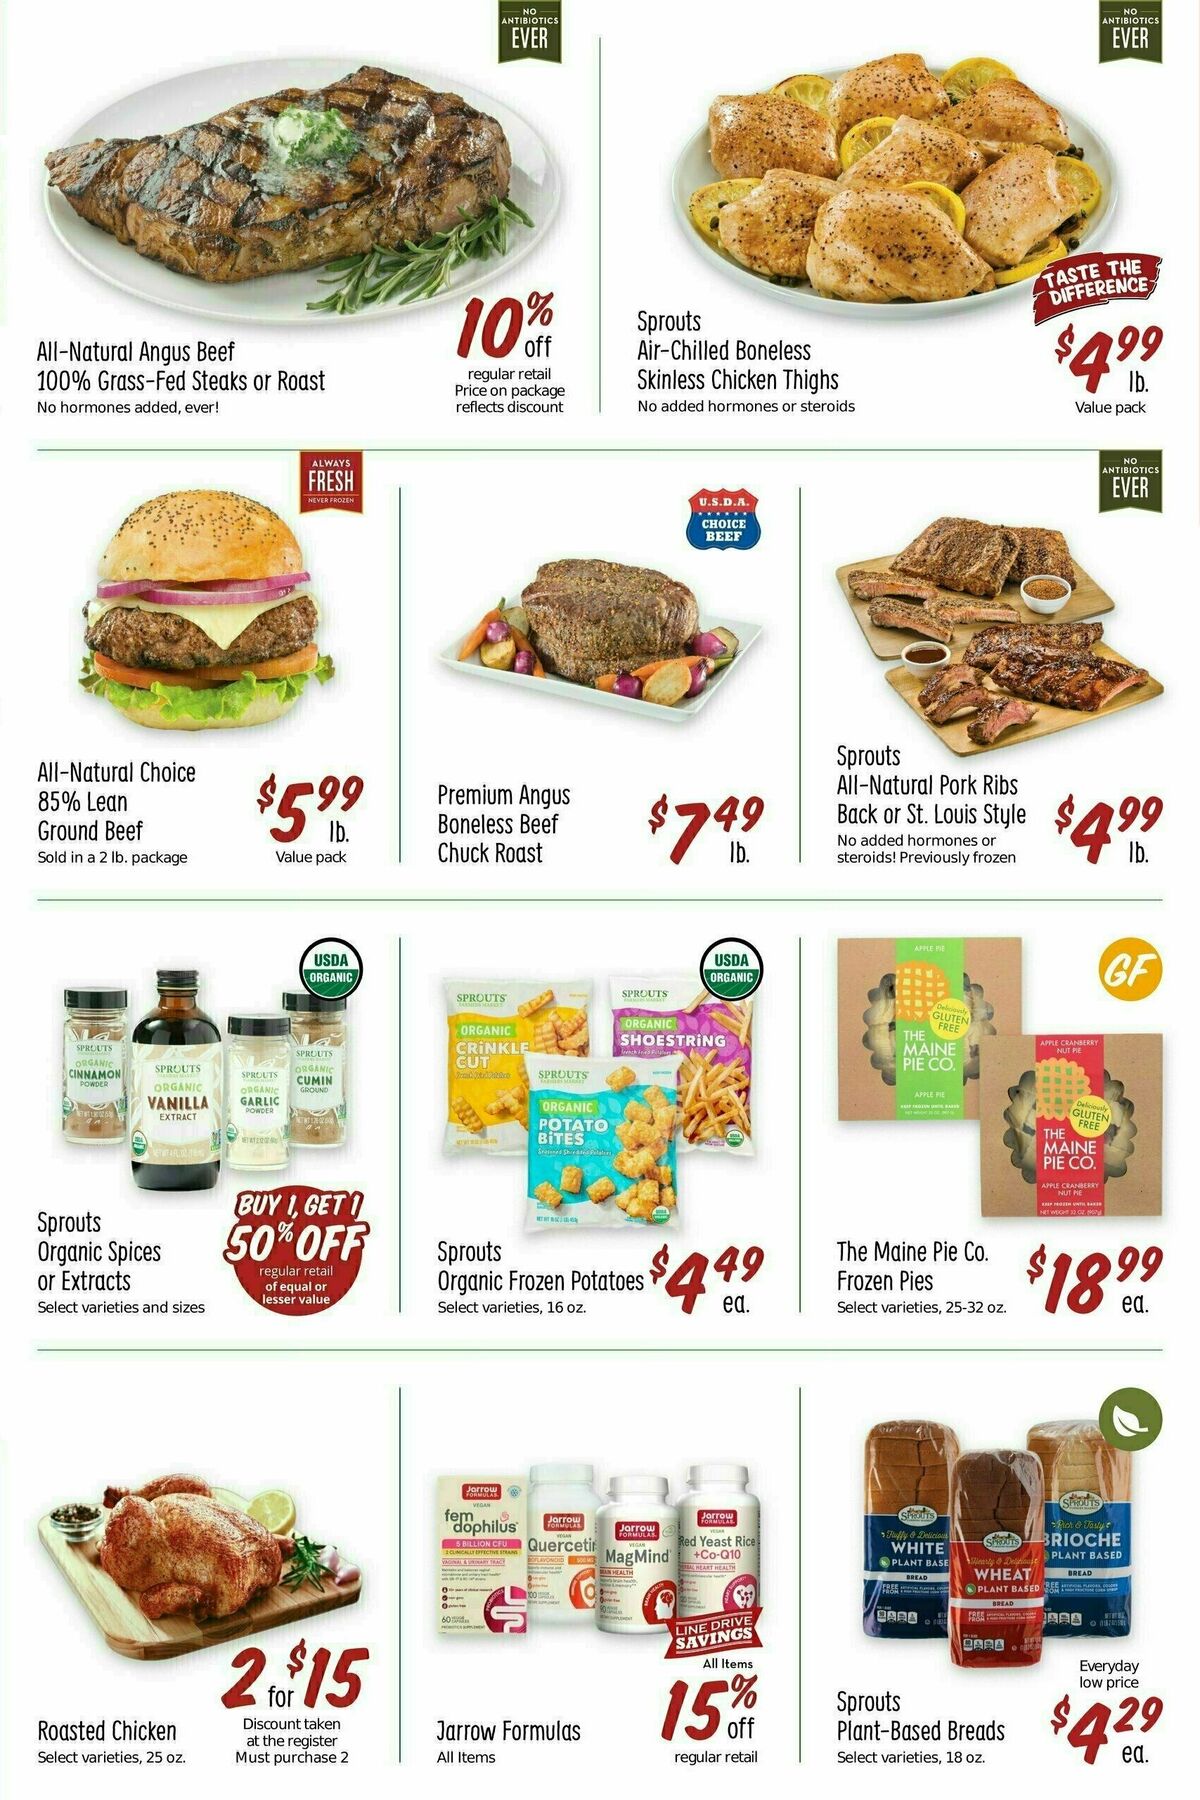 Sprouts Farmers Market Weekly Ad from November 1